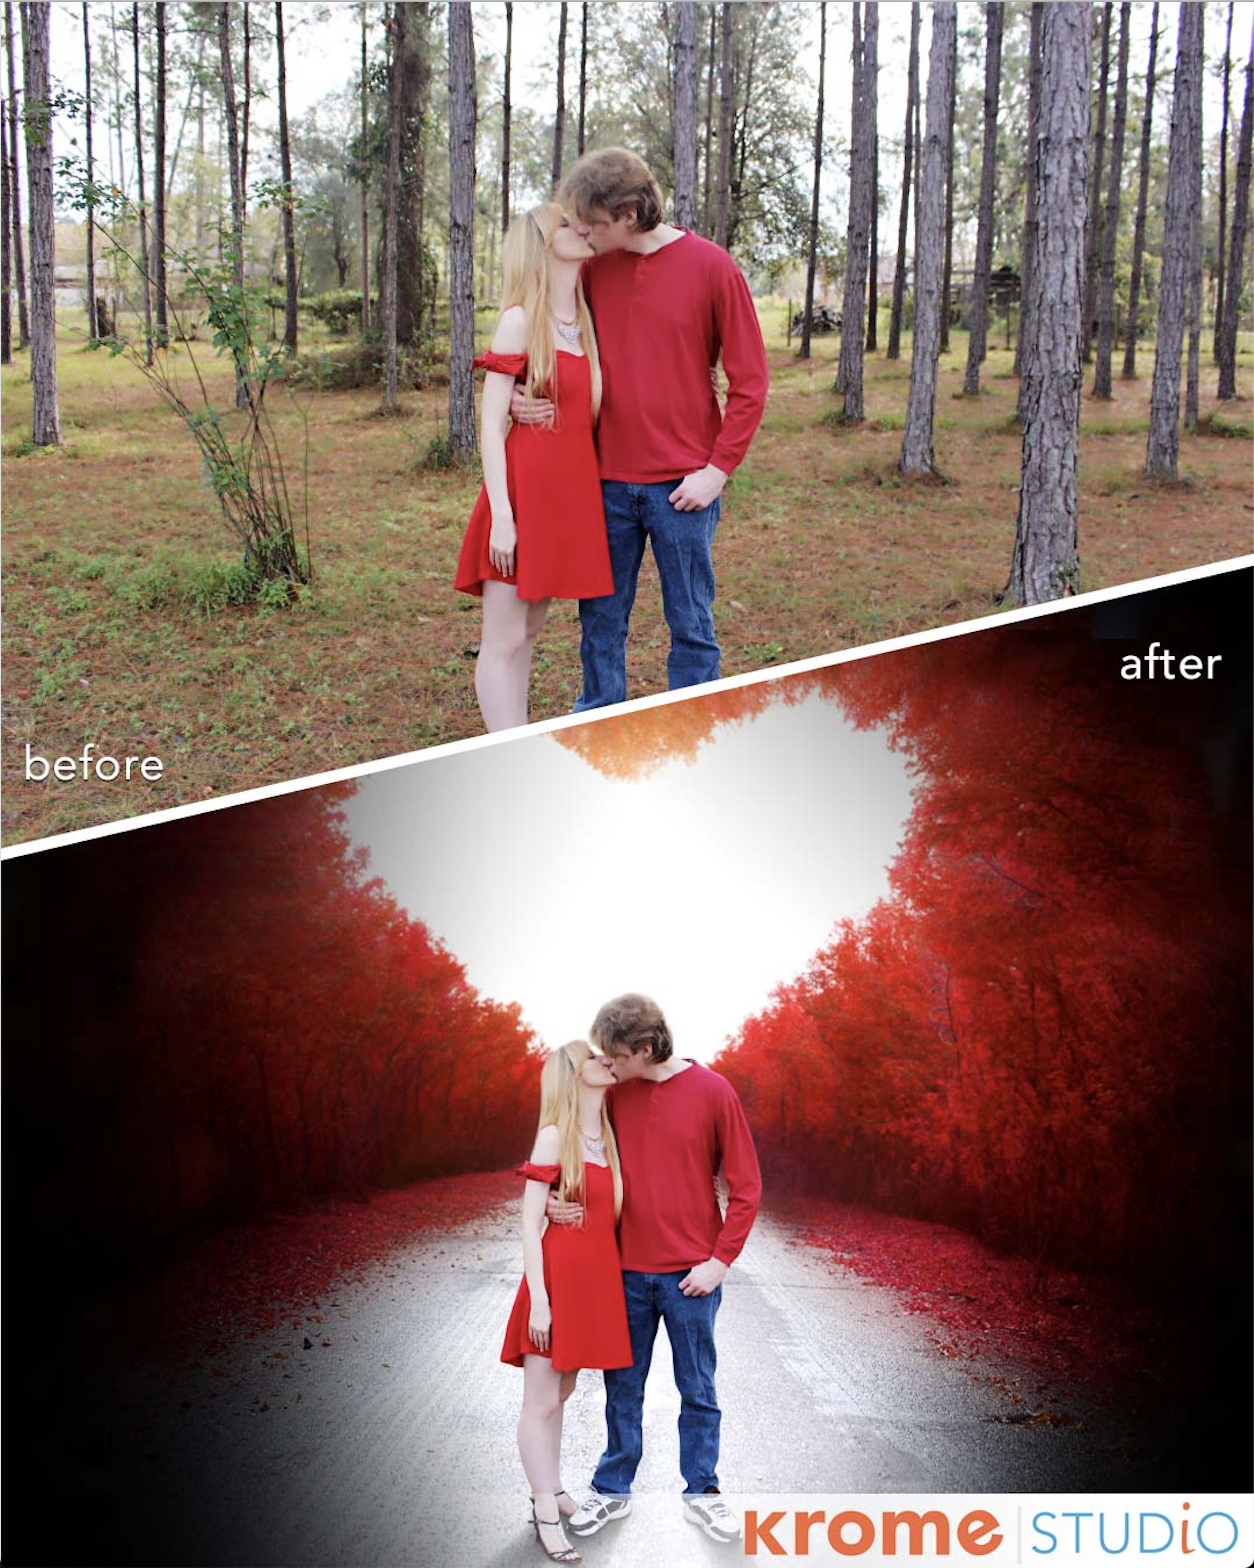 Two images on top of one another. Image one contains a couple kissing with a normal background. Image two contains the same couple but placed in a beautifully colorful and vibrant background of a road with trees of red leaves. The best photo service out there. 